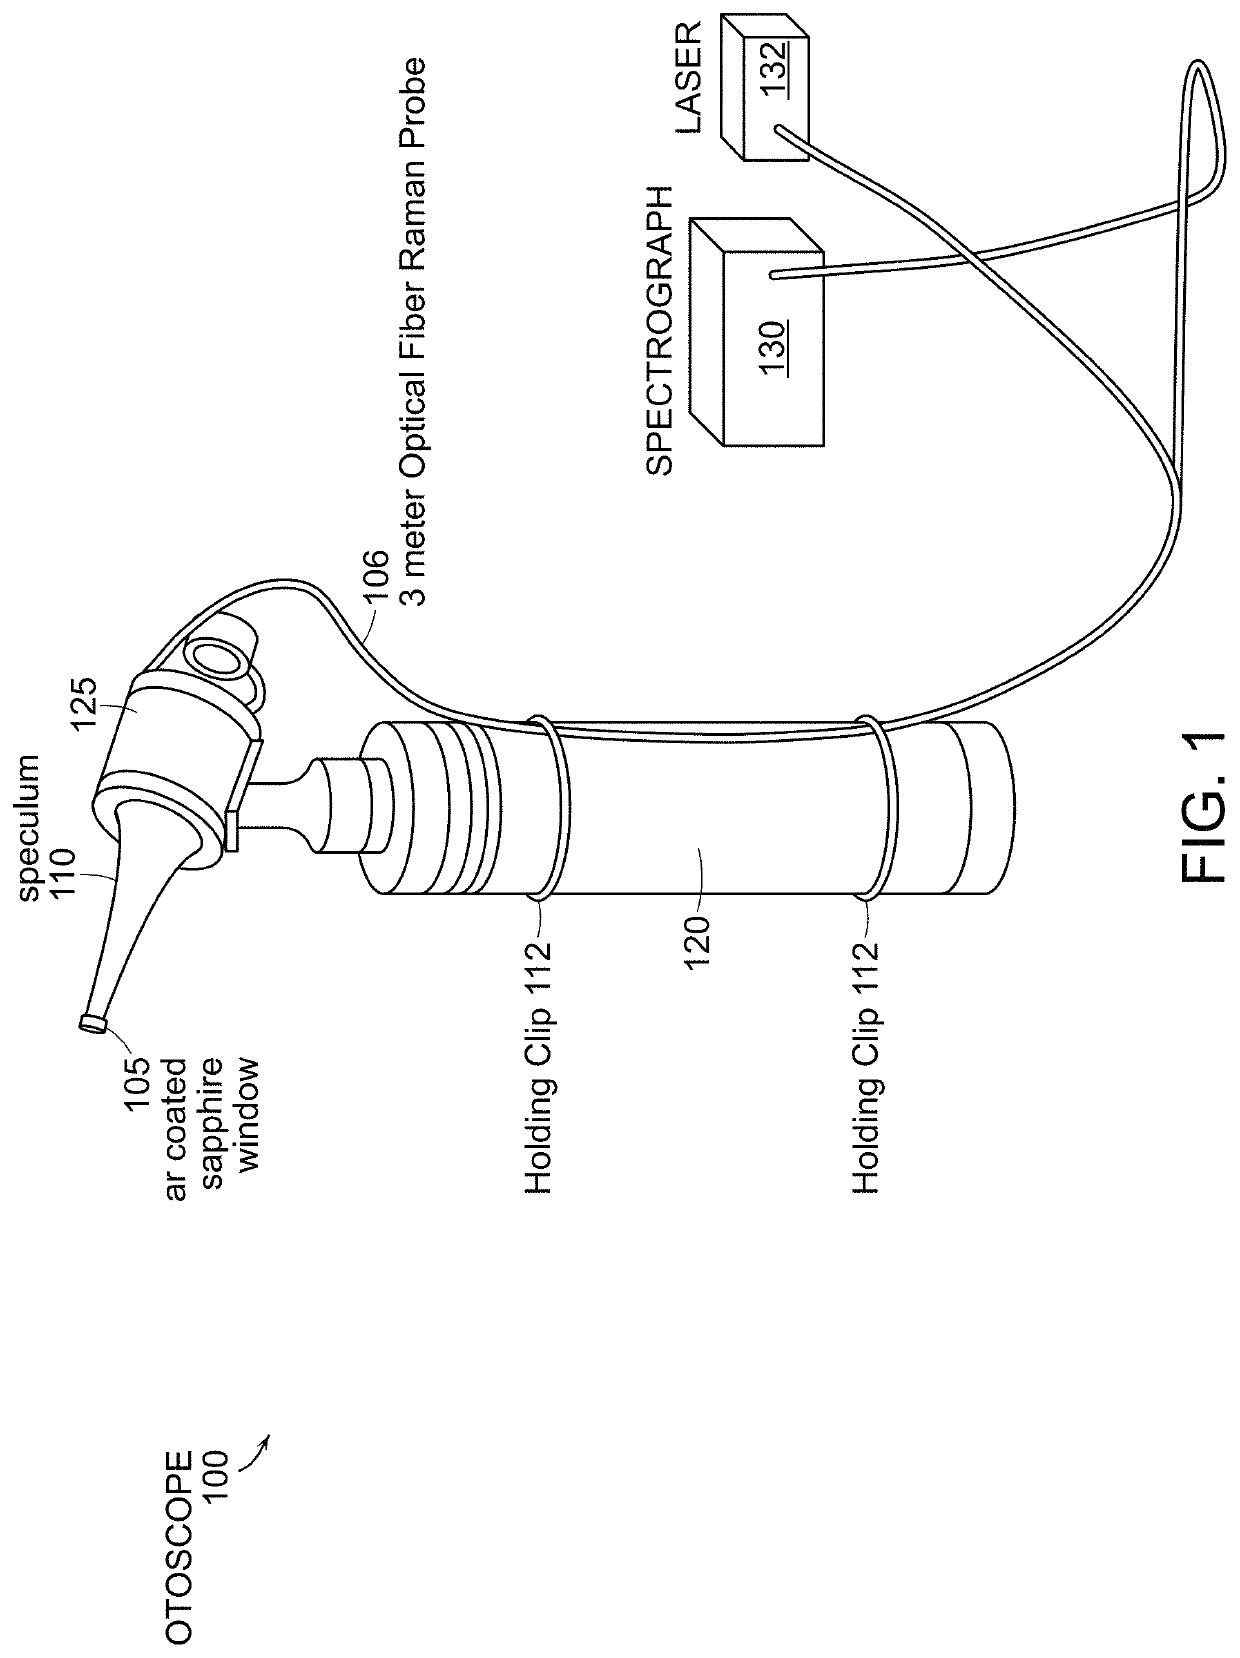 Systems and methods for diagnosis of middle ear conditions and detection of analytes in the tympanic membrane